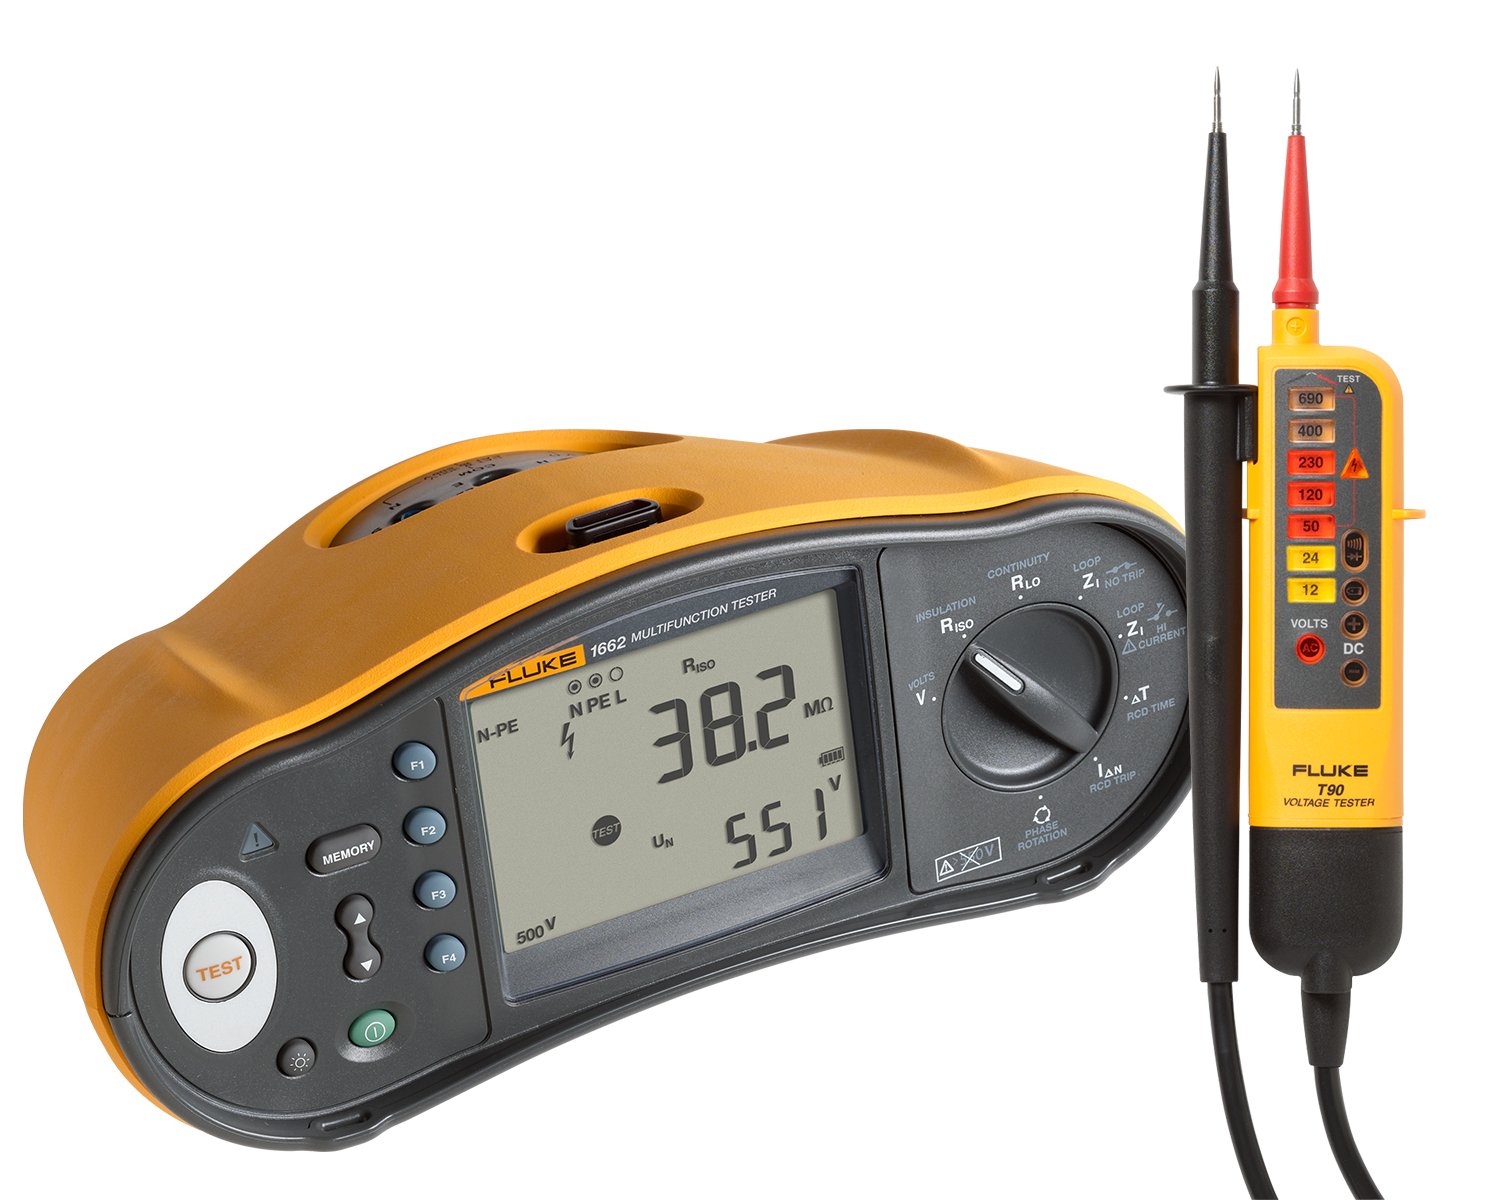 Fluke 1662 Multifunction Installation Tester plus a T90 Voltage and Continuity Tester